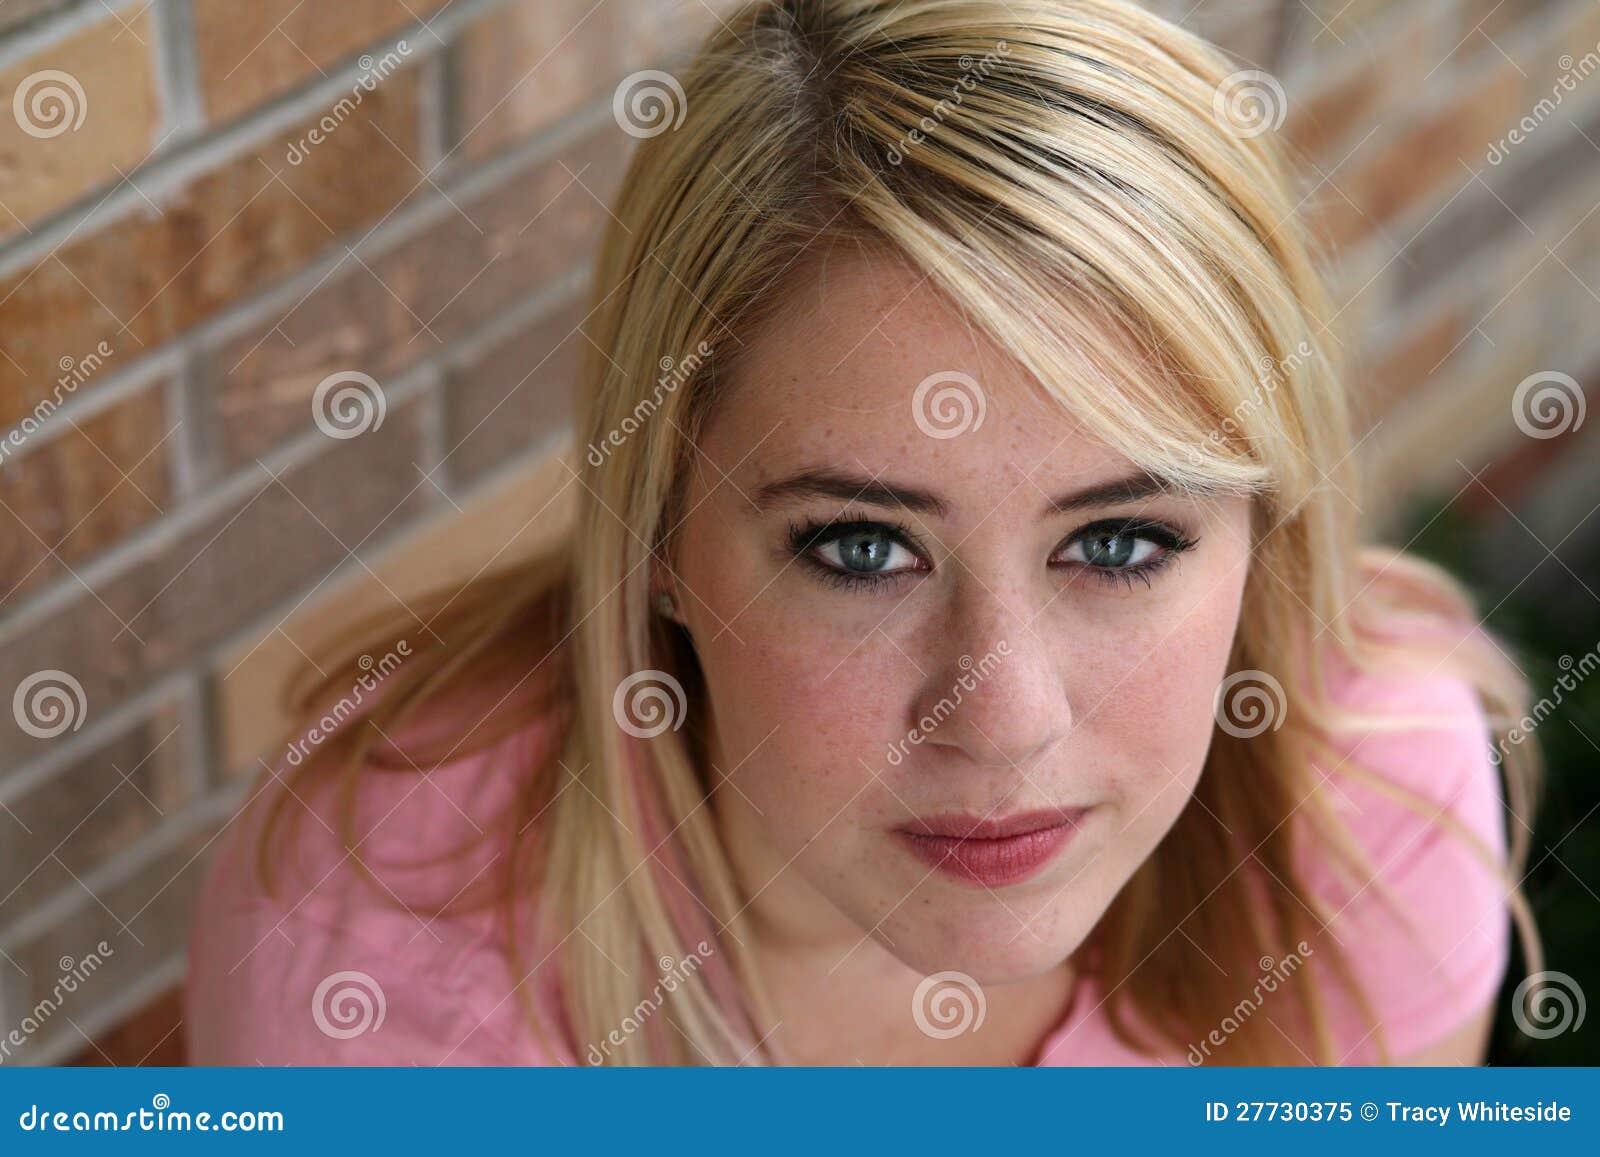 Beautiful Girl with Blonde Hair and Freckles Stock Image - Image of casual,  long: 27730375